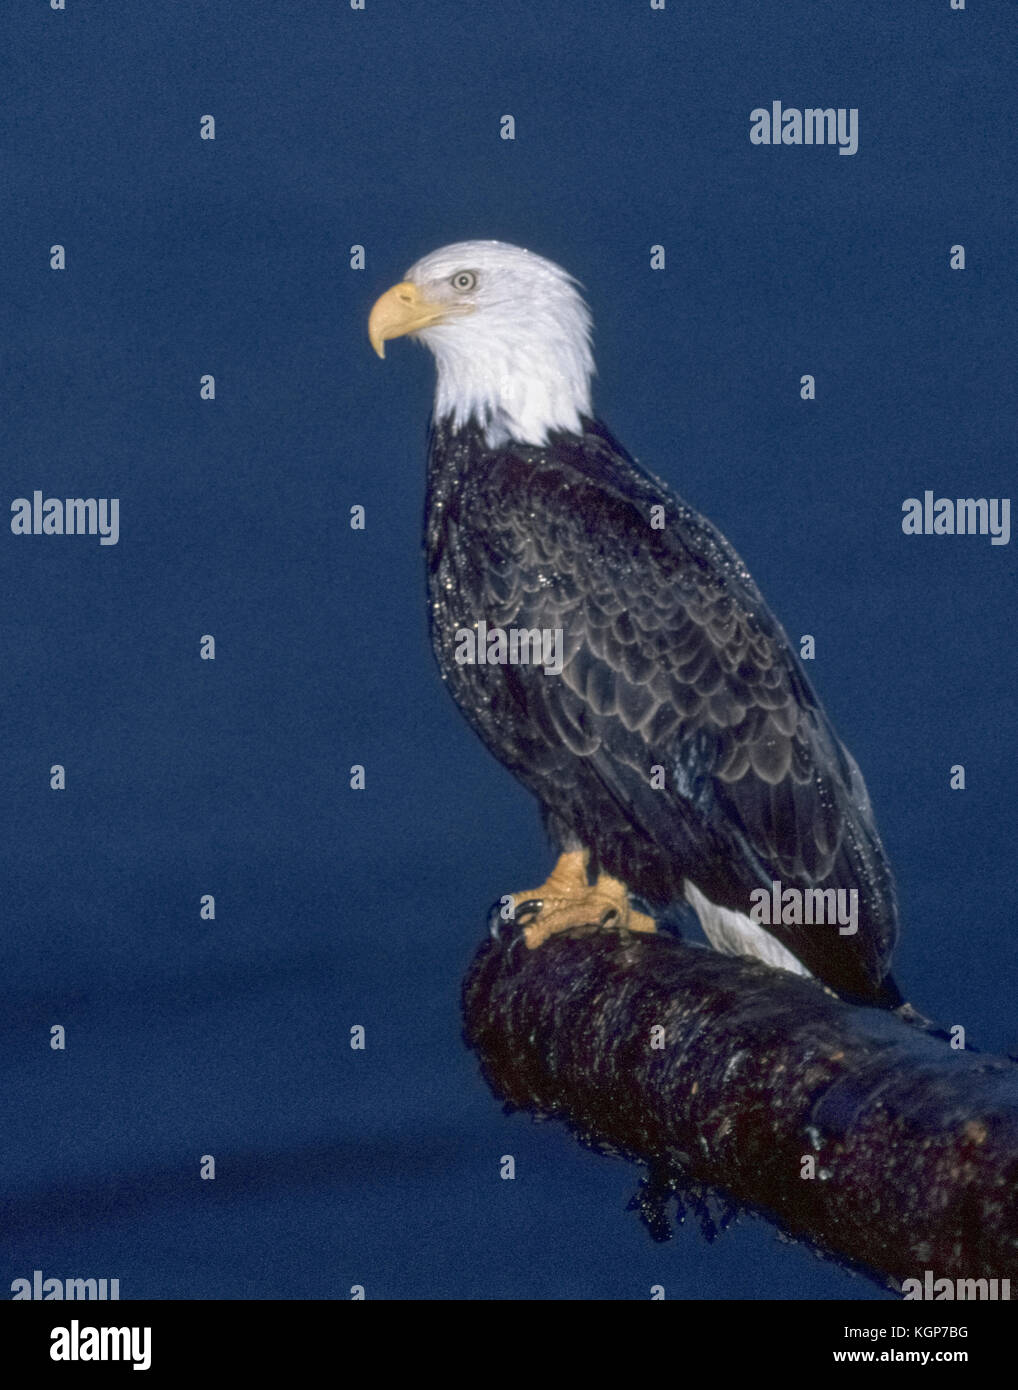 This American bald eagle (Haliaeetus leucocephalus) is caught at night by the flash from a camera as the bird of prey rests in the rain on a tree limb that is his perch over Kachemak Bay on the Kenai Peninsula at Homer, Alaska, USA. Native to North America, the bald eagle was adopted as the national bird of the United States in 1782. Stock Photo